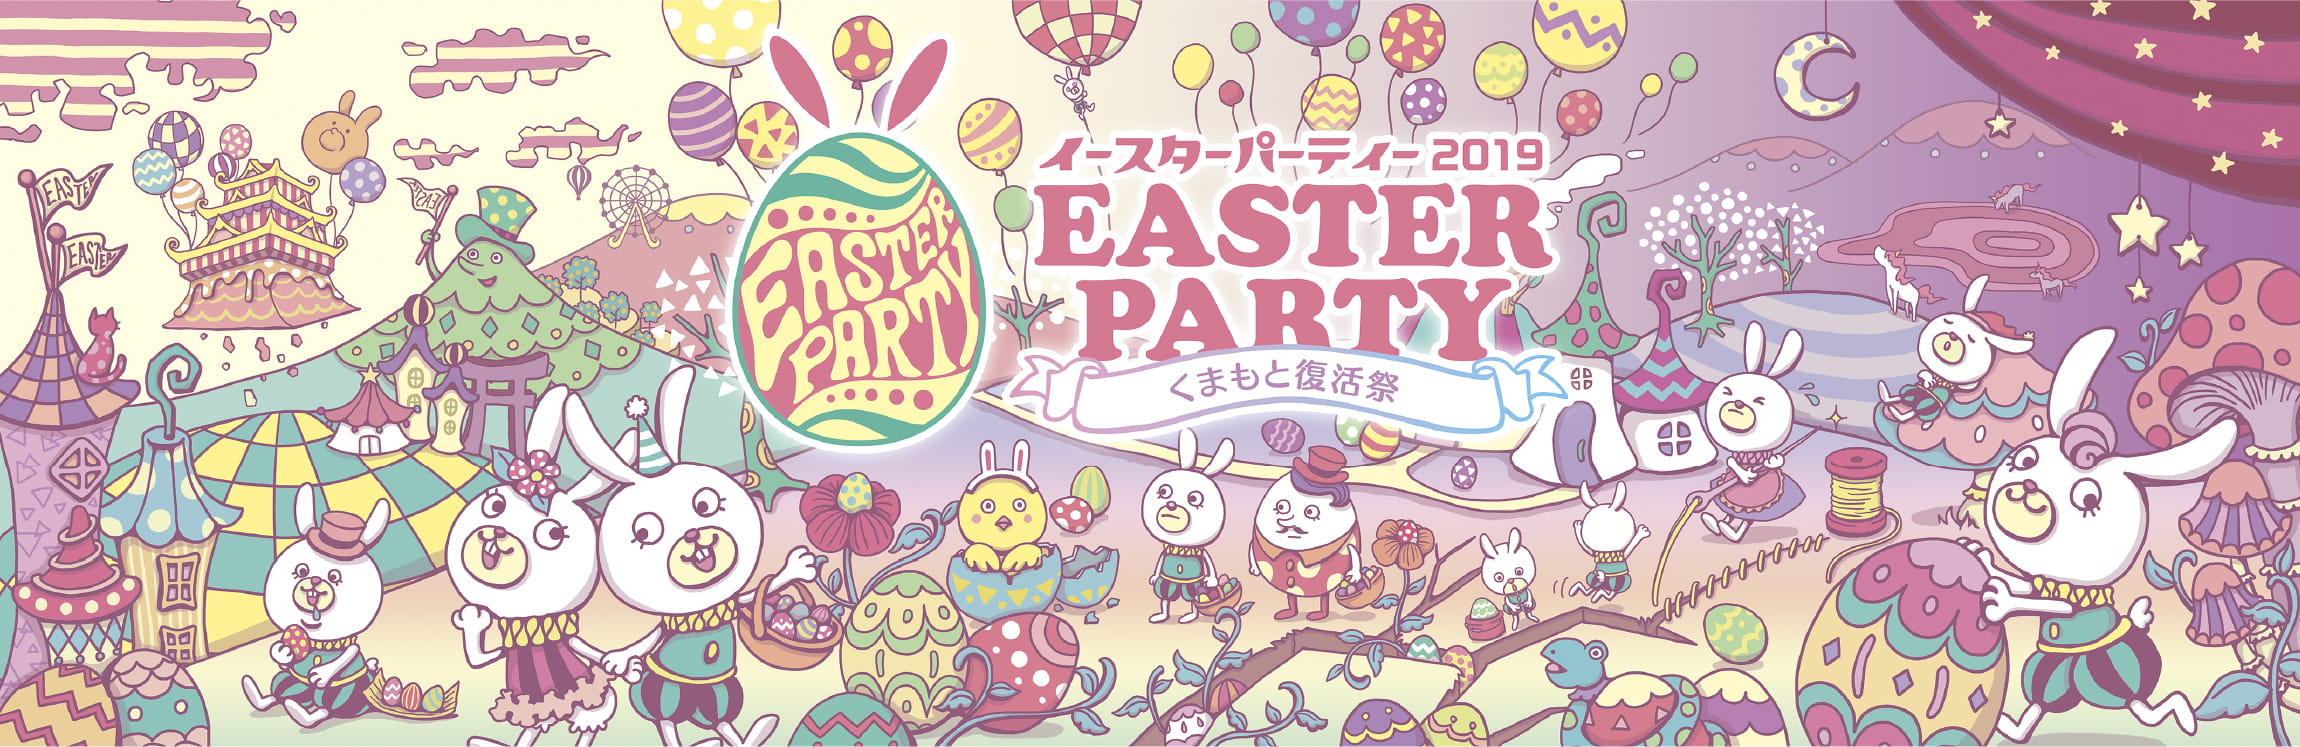 Easter Party くまもと復活祭 イラスト